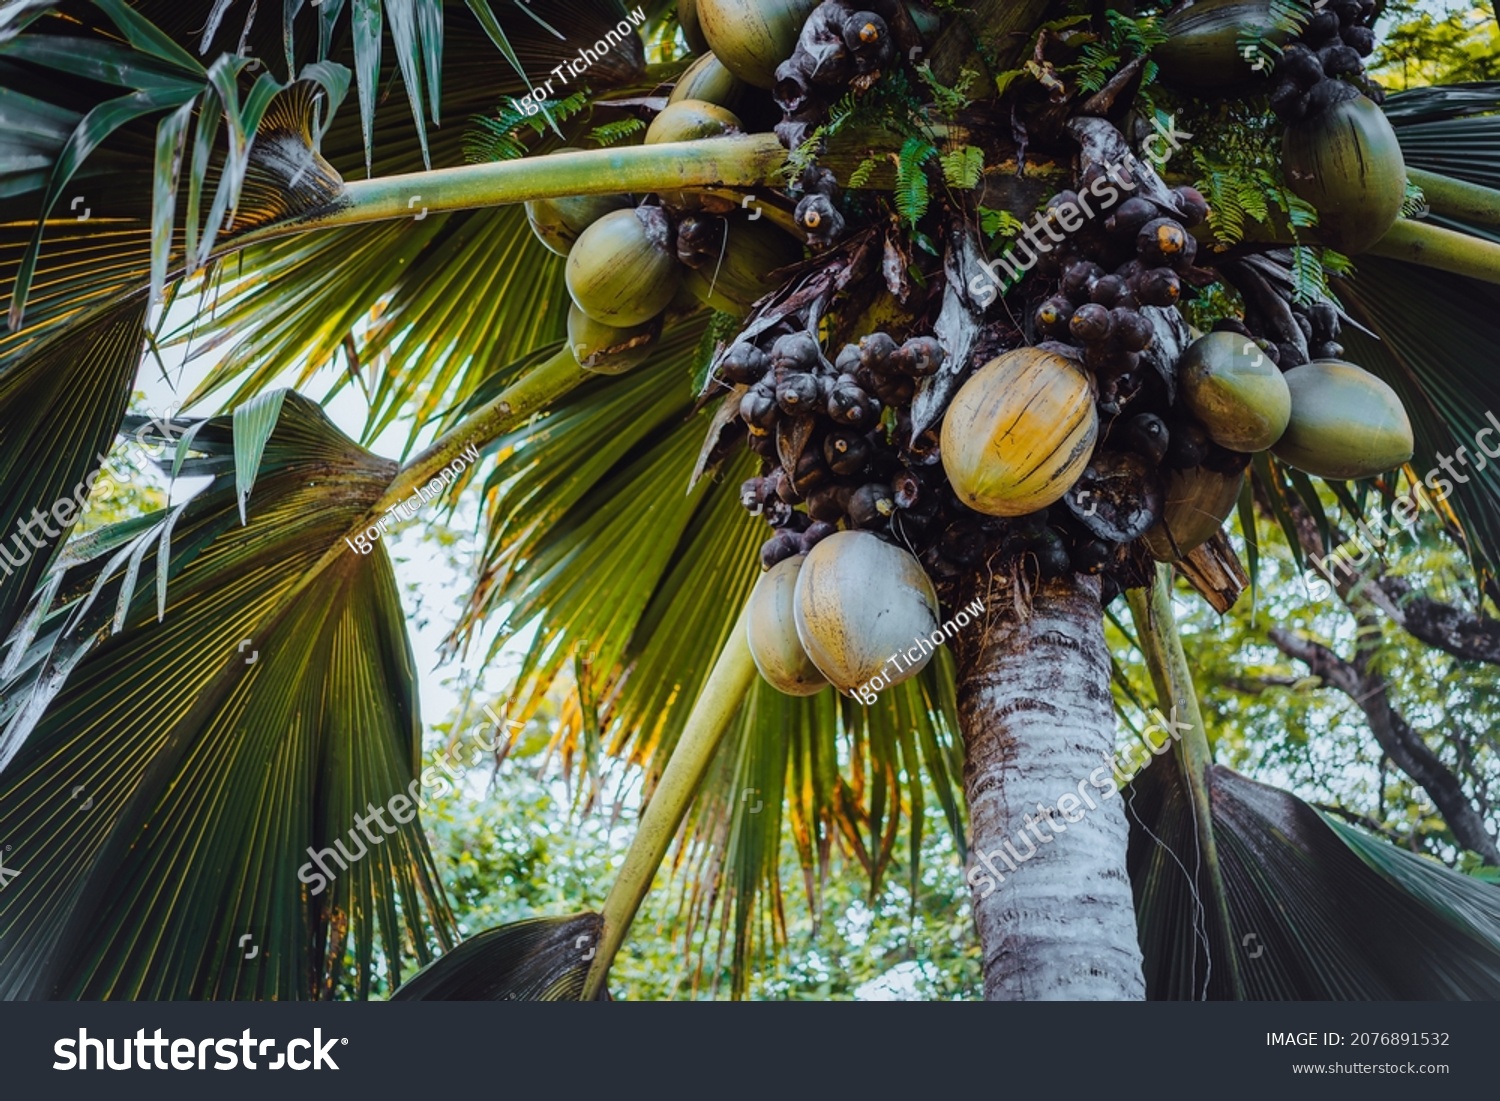 Close up of Lodoicea known as the coco de mer or double coconut. It is endemic to the islands of Praslin and Curieuse in the Seychelles #2076891532